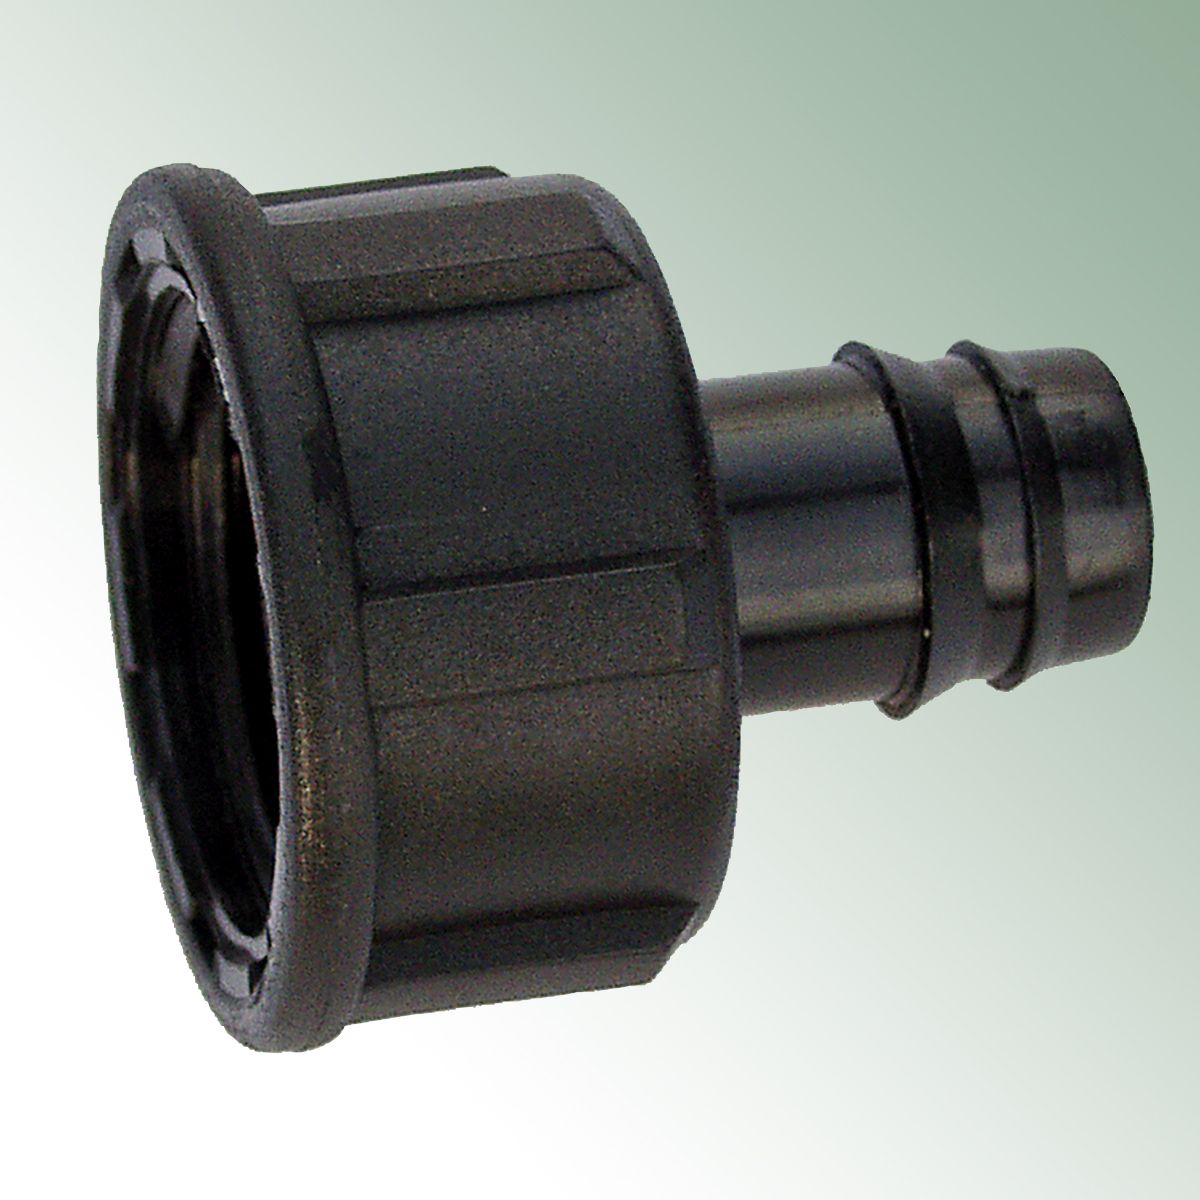 Connector 16 mm x 3/4 Female Thread for Pipe